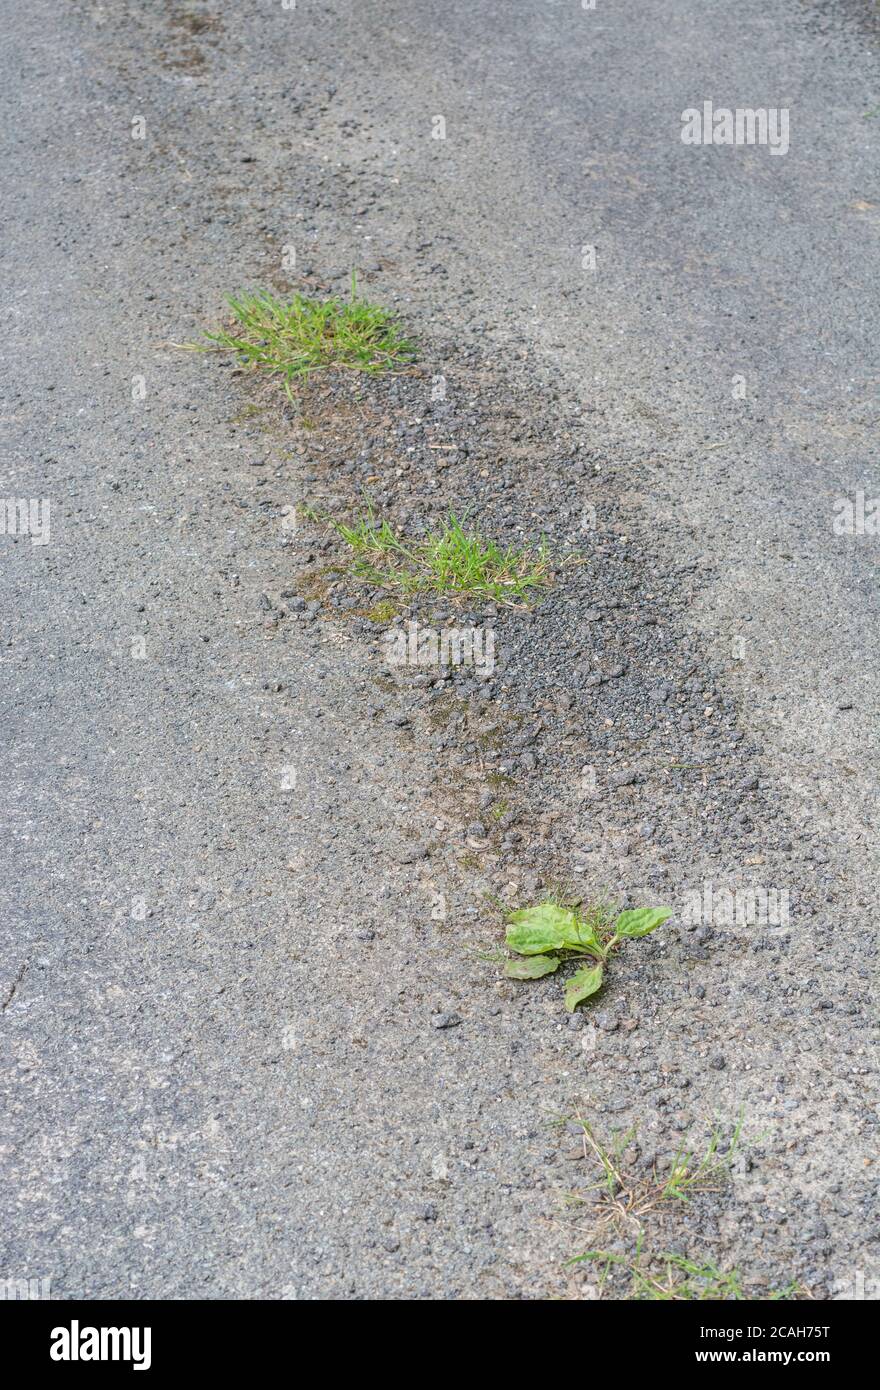 Common UK weed Greater Plantain / Plantago major growing in the baking tarmac of country road in sunshine. Survival of the fittest, & medicinal plant. Stock Photo